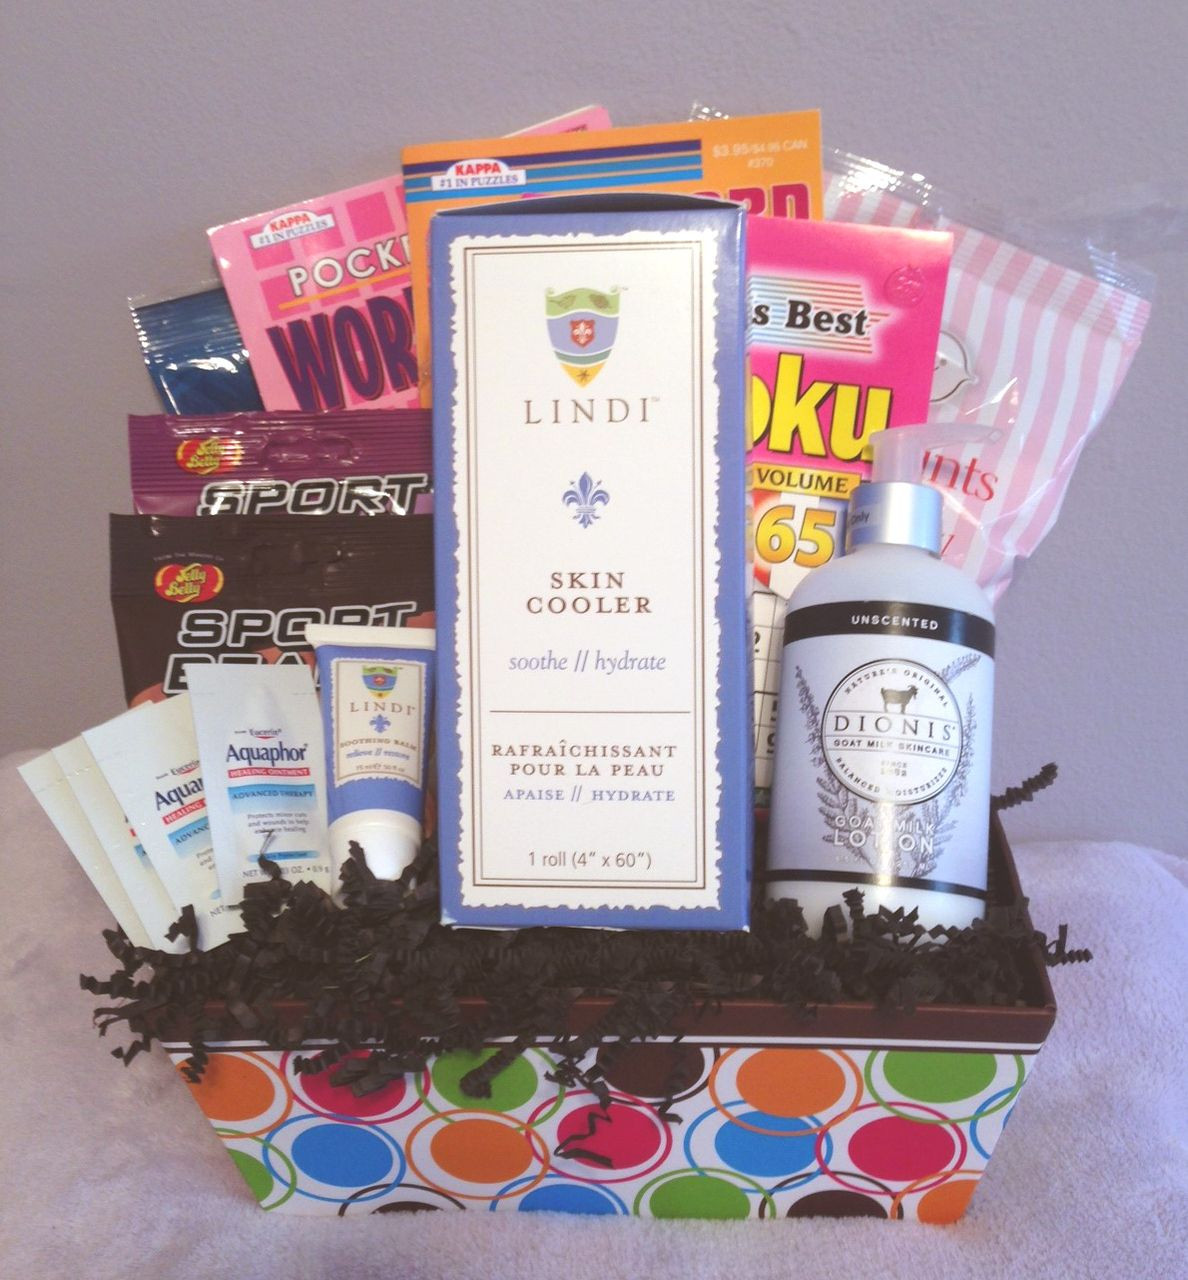 The 22 Best Ideas for Gift Basket Ideas for Cancer Patient - Home